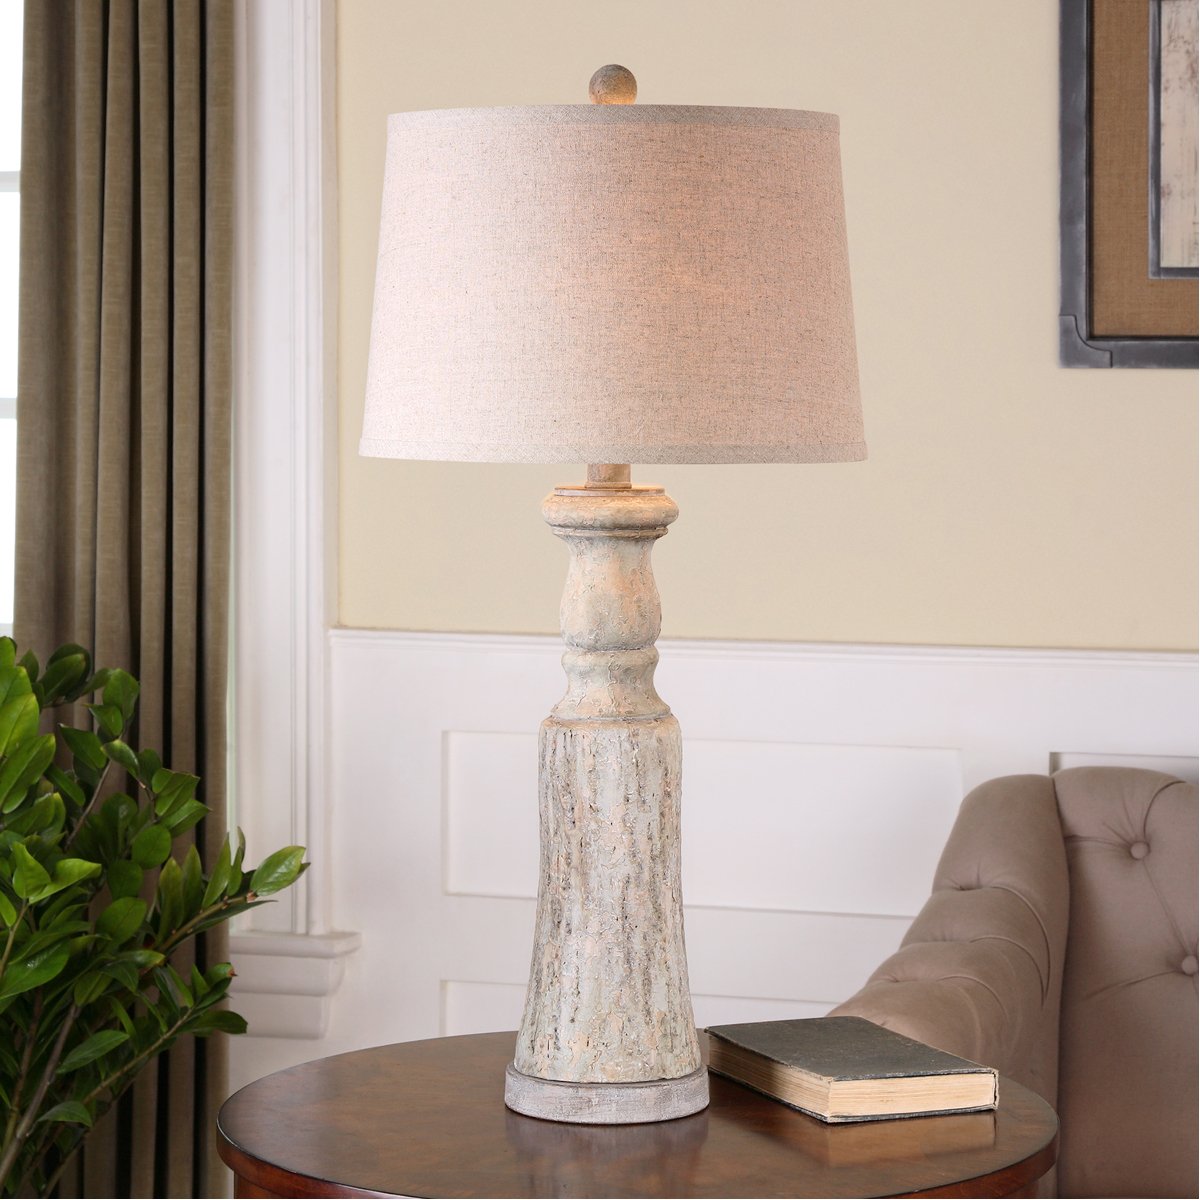 Uttermost Cloverly Table Lamp, Set of 2